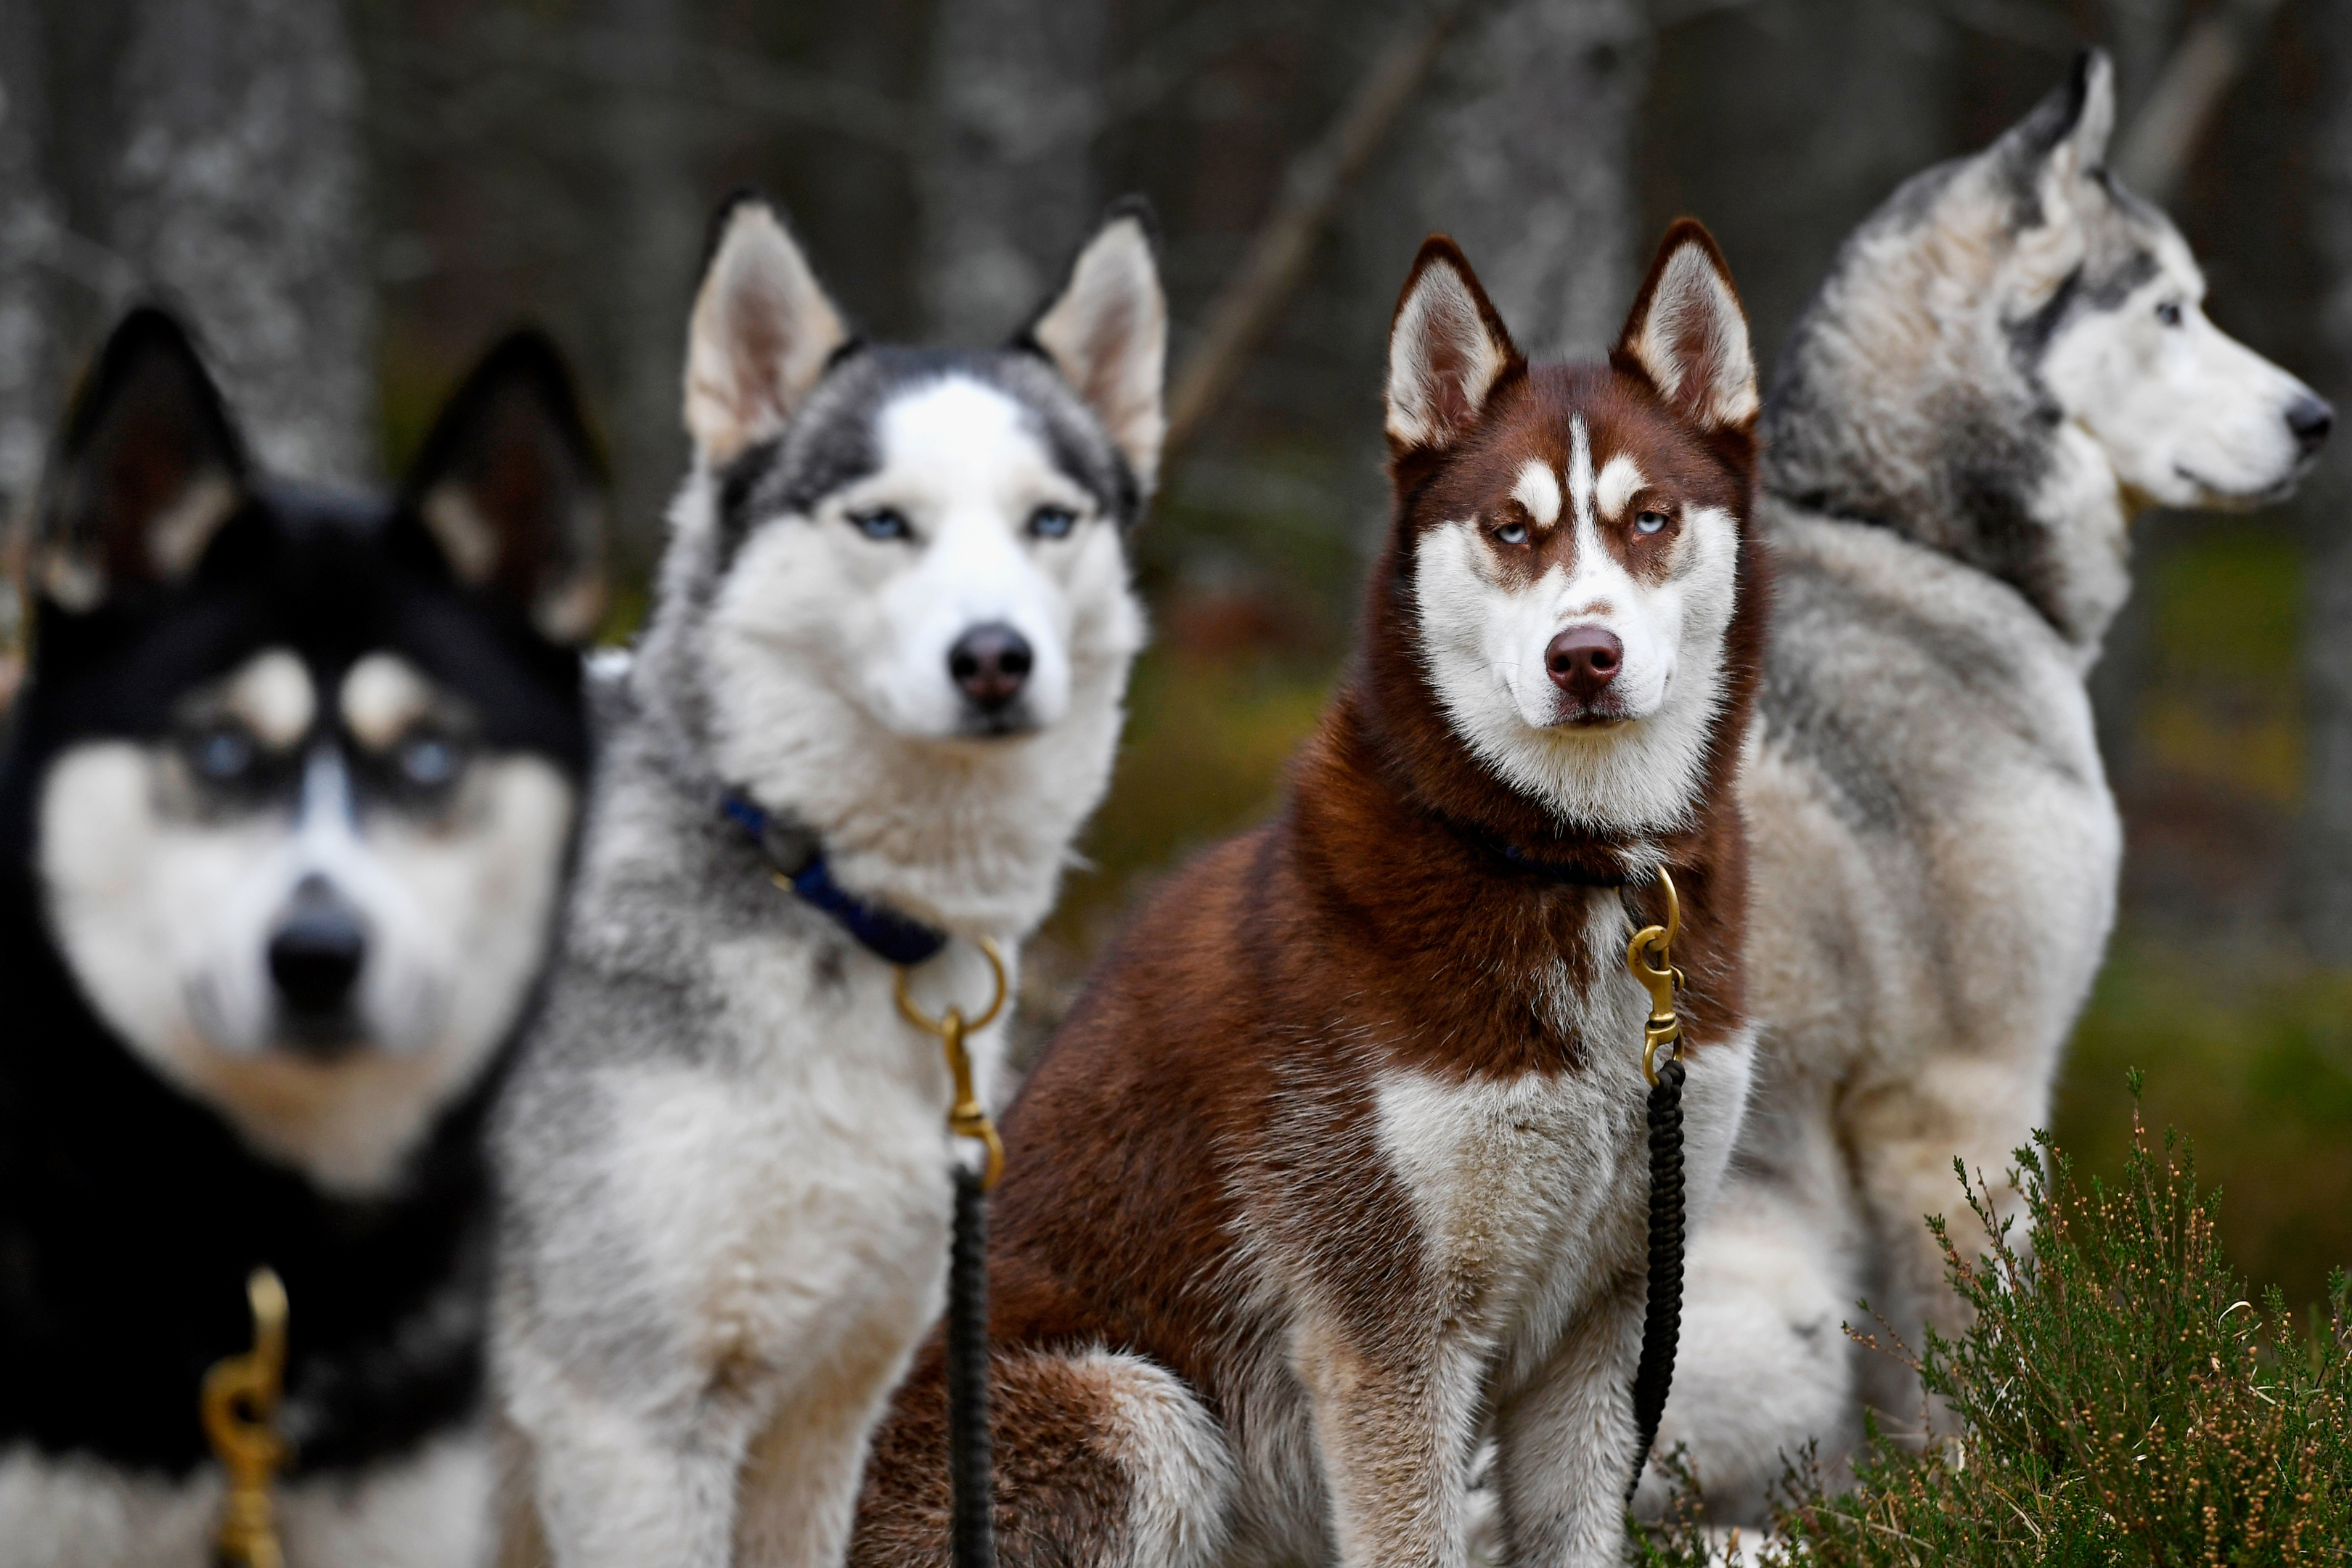 Huskies wait for practice at a forest course ahead of the Aviemore Sled Dog Rally (Photo by Jeff J Mitchell/Getty Images)